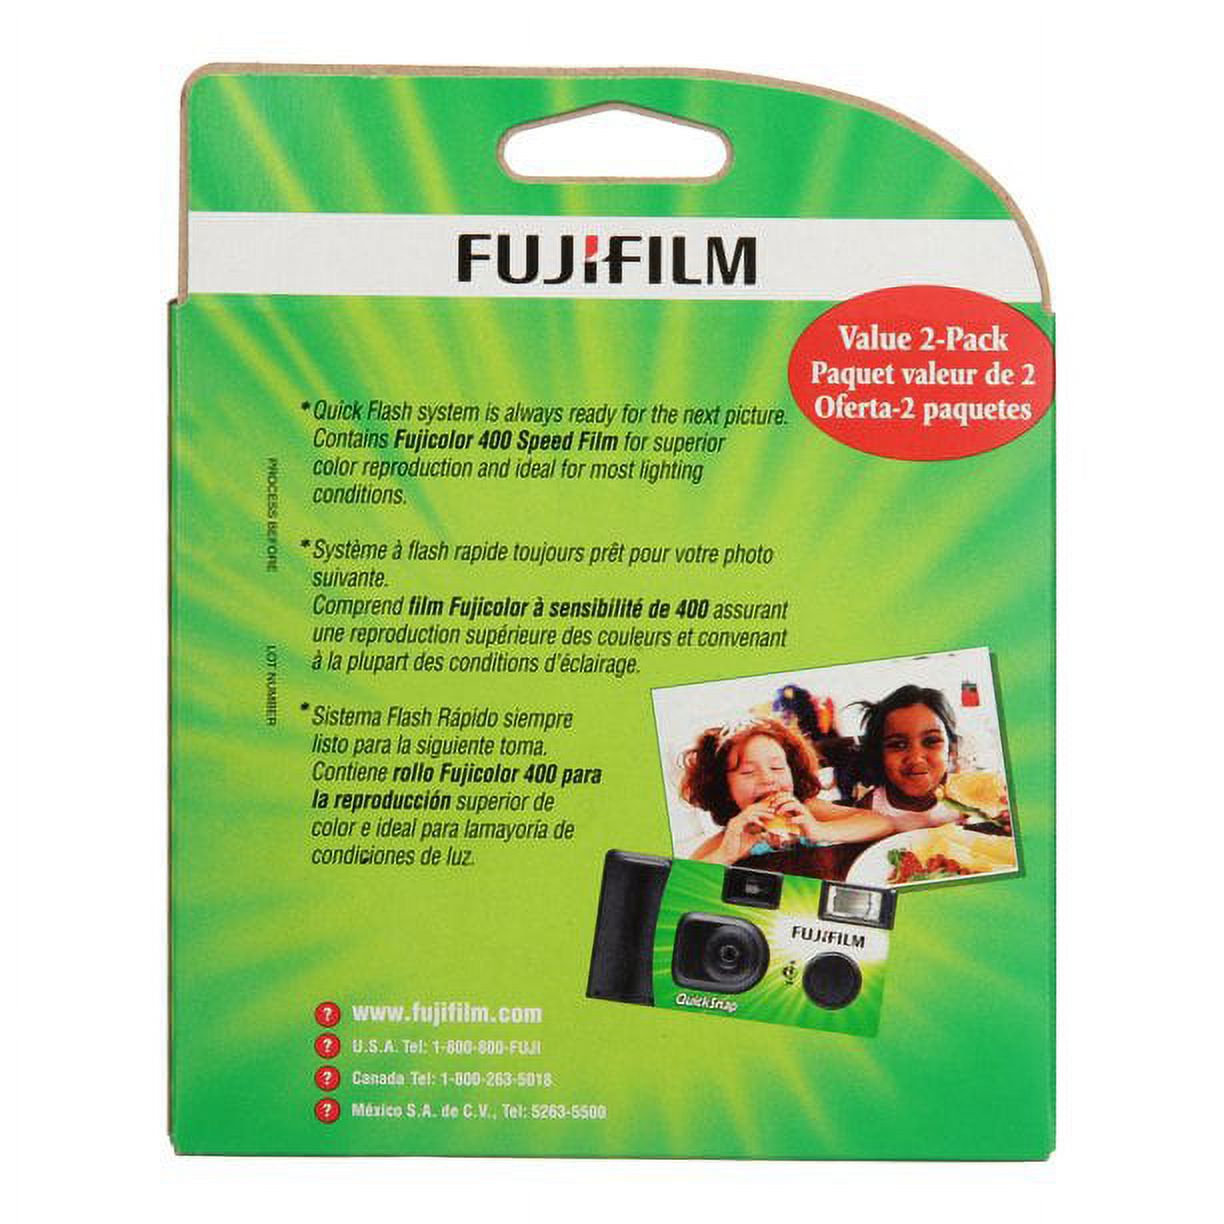 Fujifilm QuickSnap One Time Use 35mm Camera with Flash, 2 Pack - image 2 of 4